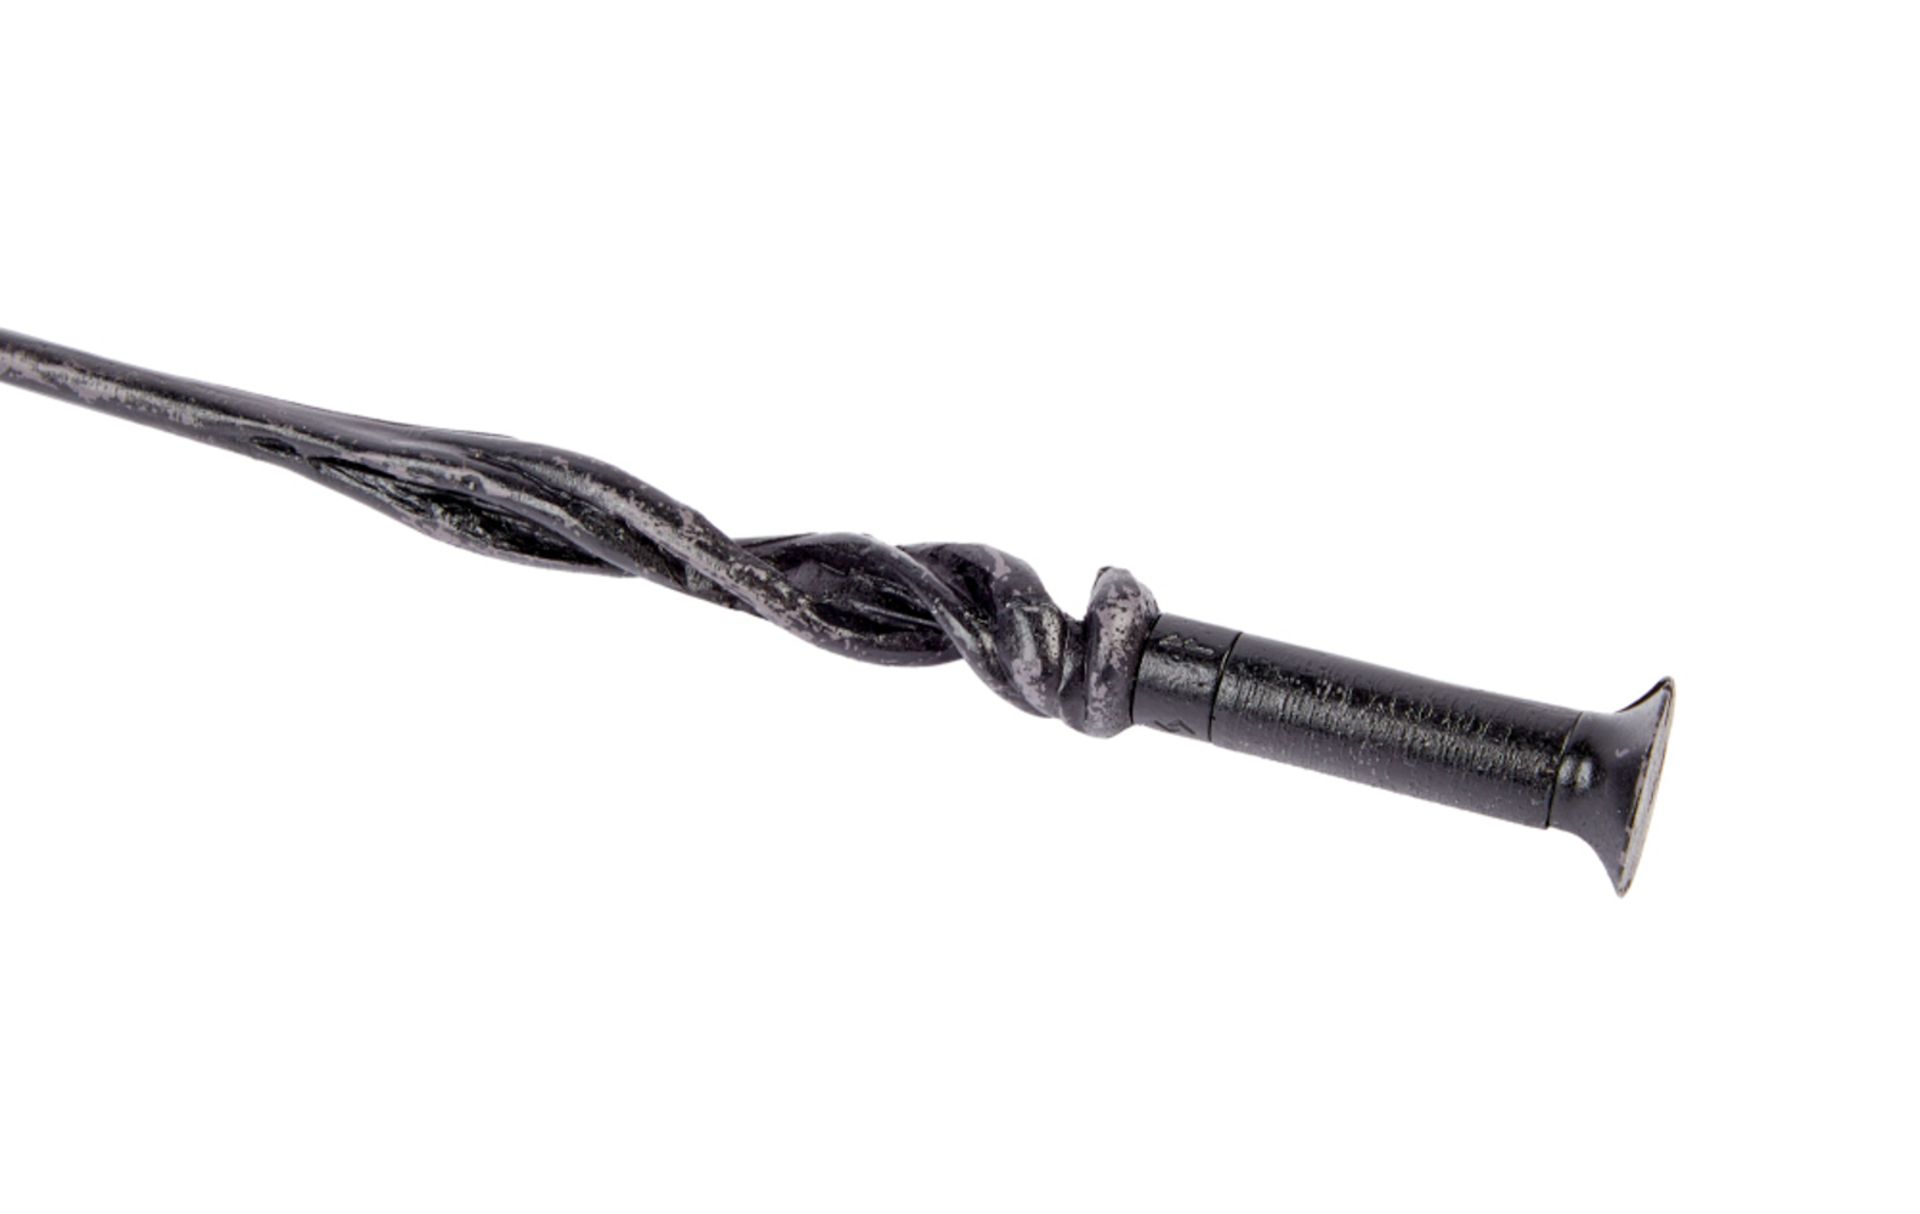 FANTASTIC BEASTS - THE SECRETS OF DUMBLEDORE | JUDE LAW "ALBUS DUMBLEDORE" UNFINISHED WAND PROP - Image 4 of 7